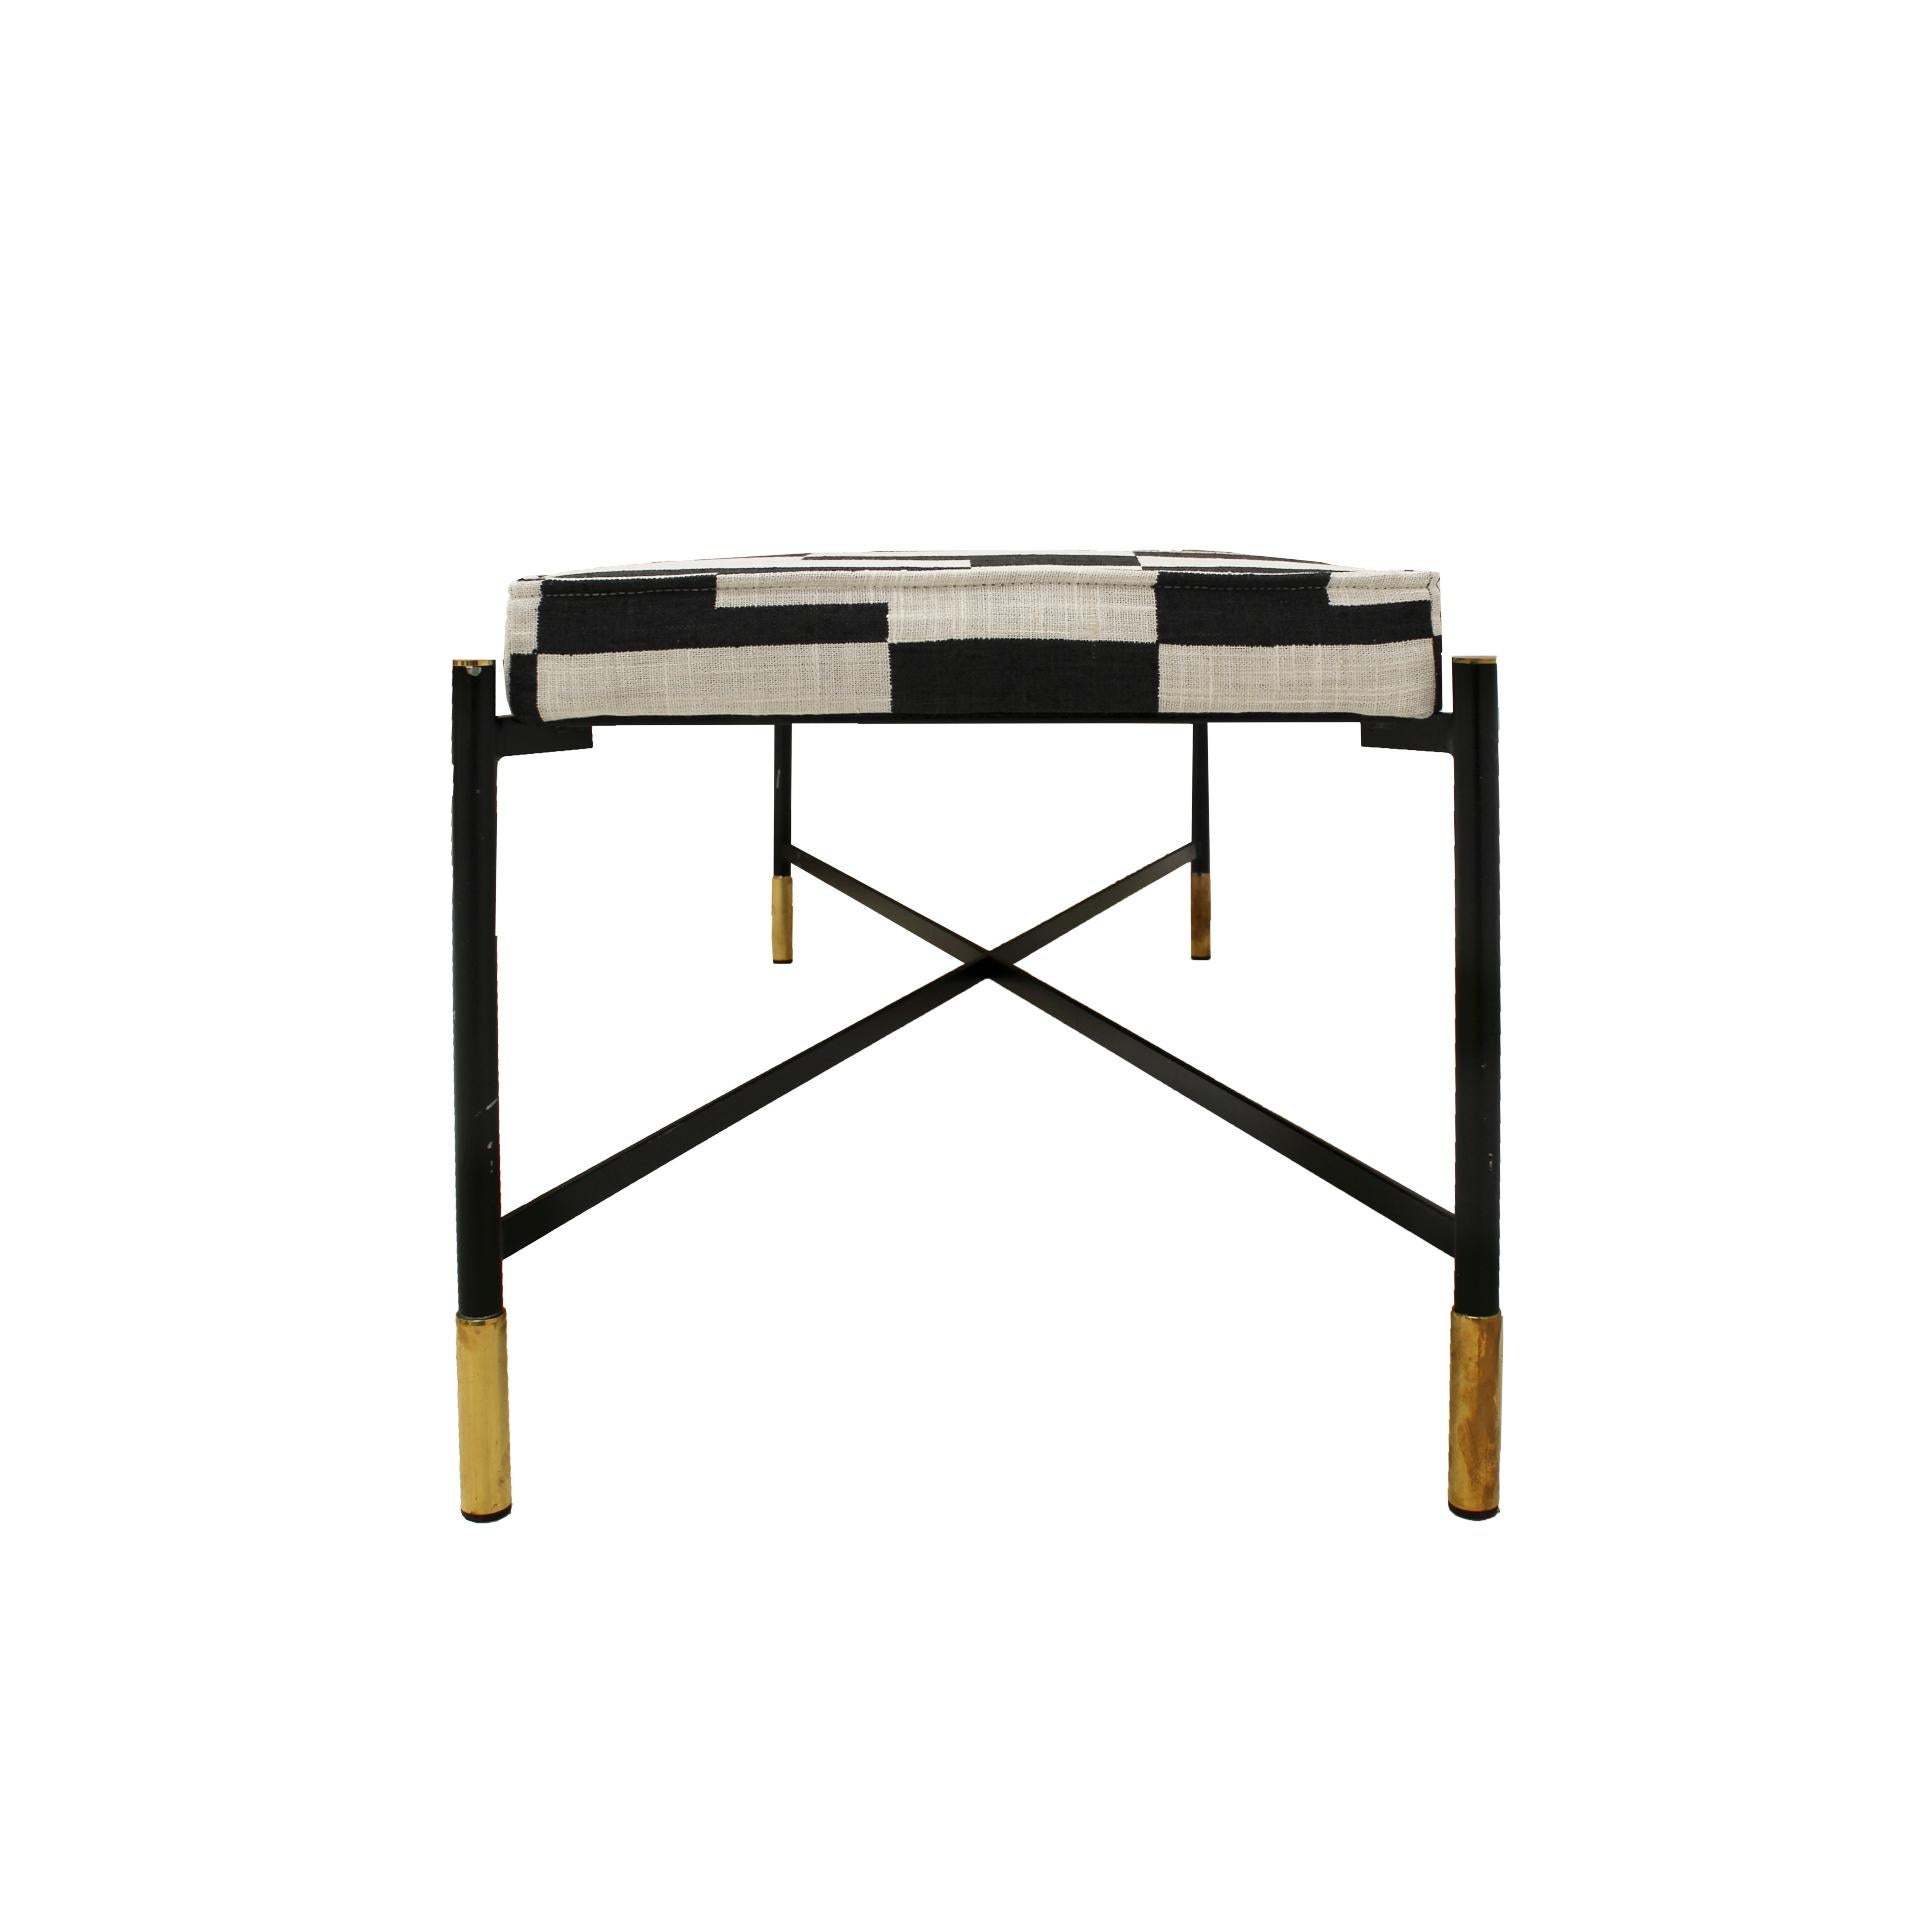 Mid-Century Modern Modern Black Lacquered Iron and Patterned Fabric, 1970s Italian Stool For Sale